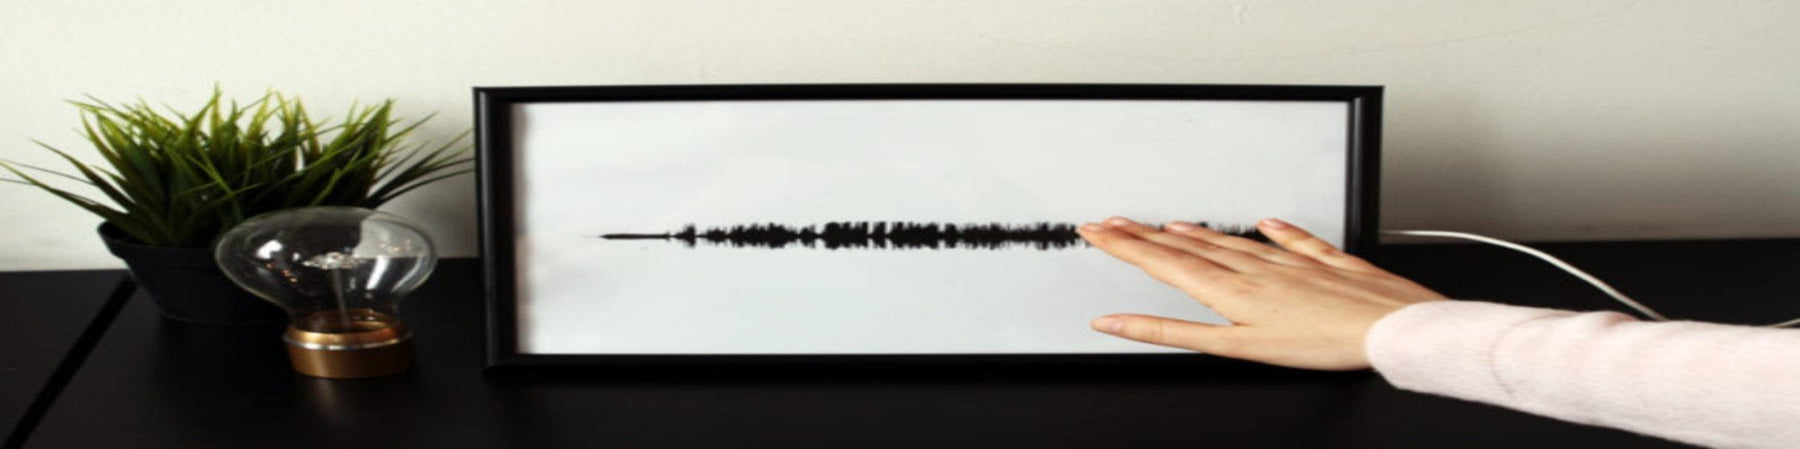 How to make an interactive sound wave print